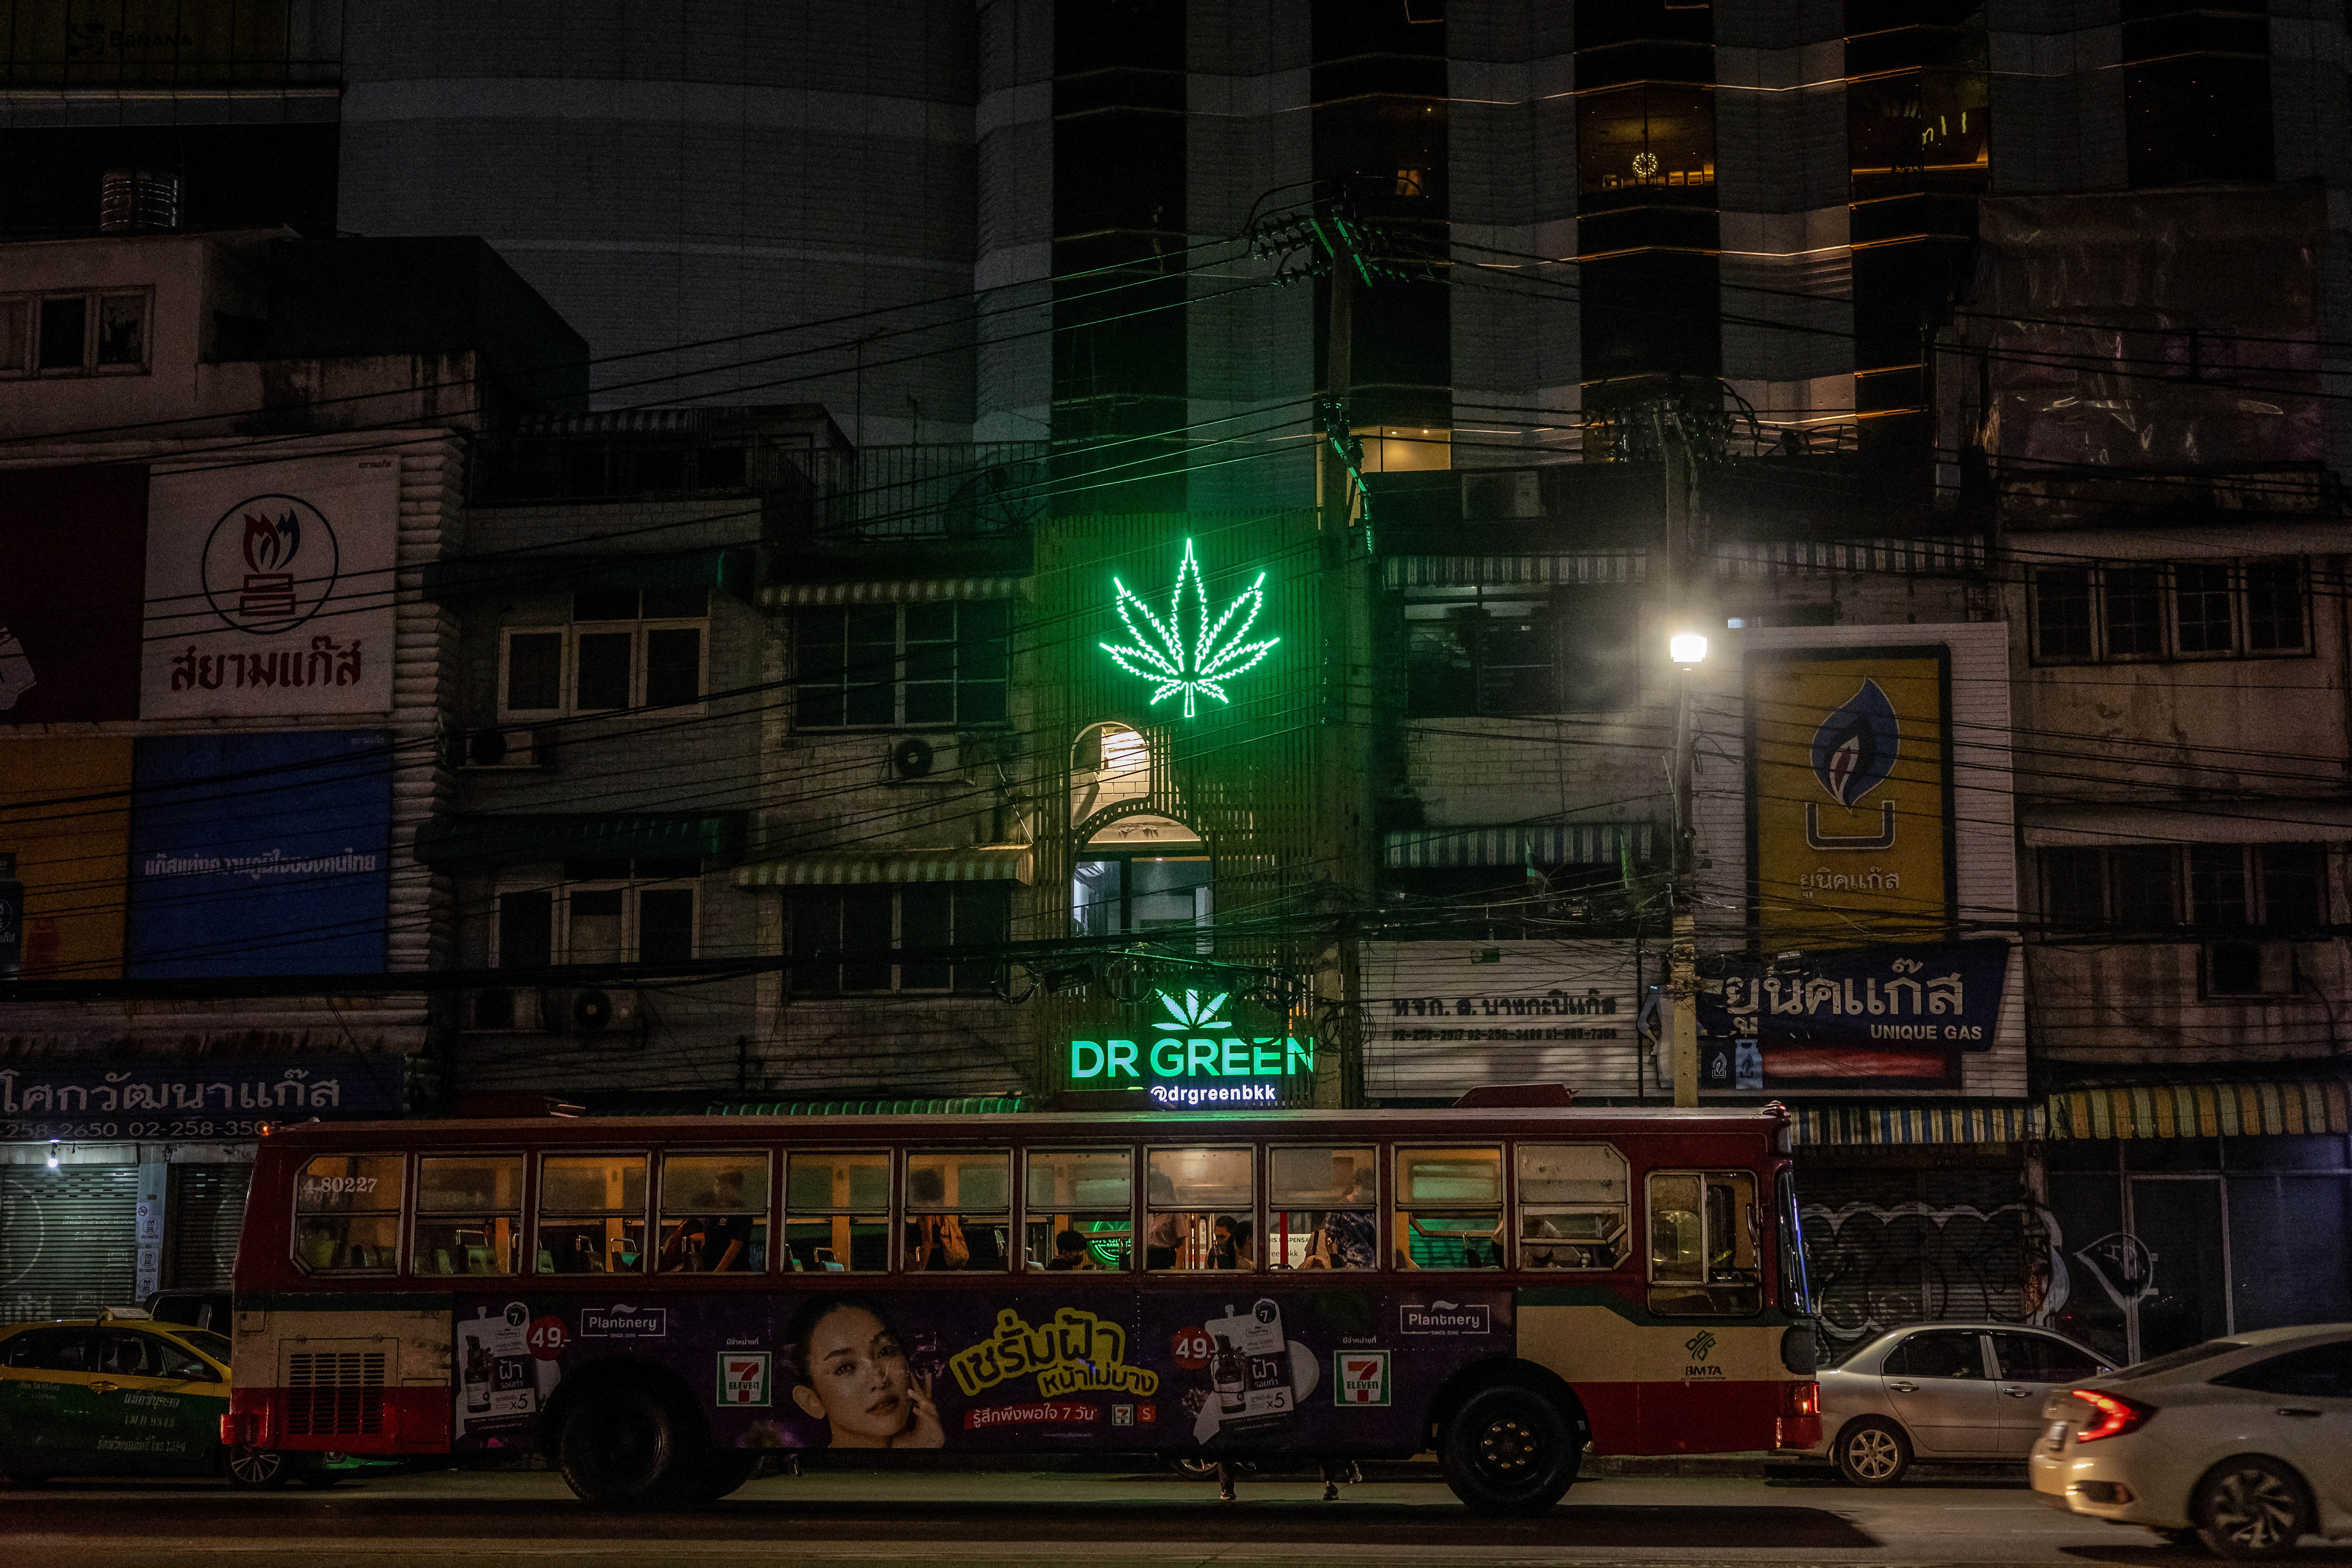 Thailand's flourishing cannabis culture to end as government seeks ban